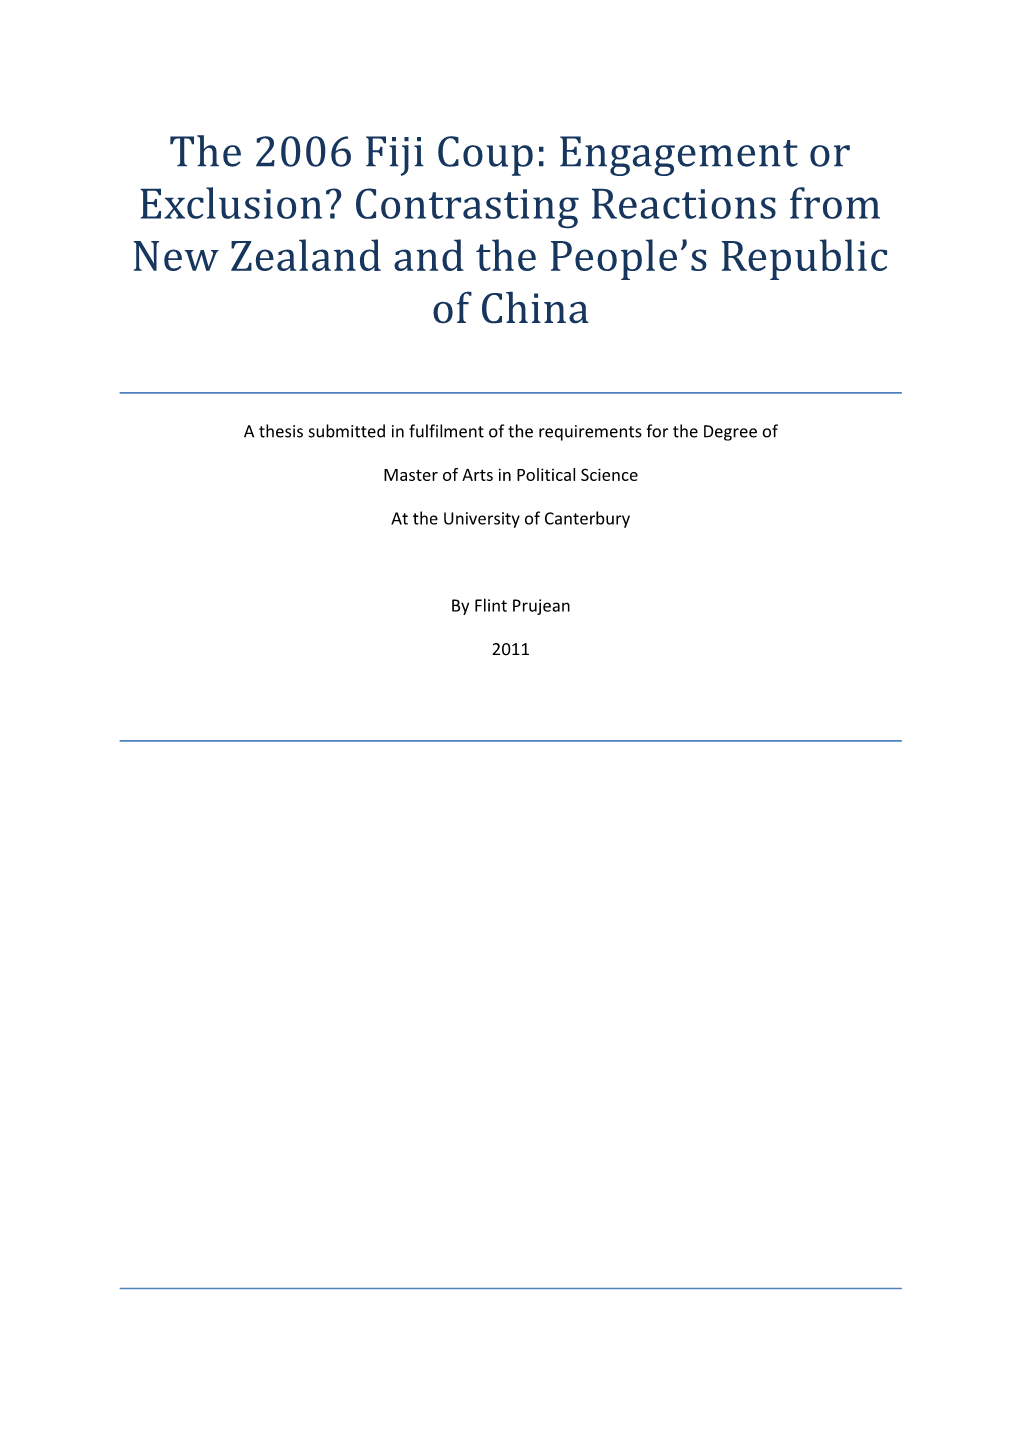 The 2006 Fiji Coup: Engagement Or Exclusion? Contrasting Reactions from New Zealand and the People’S Republic of China